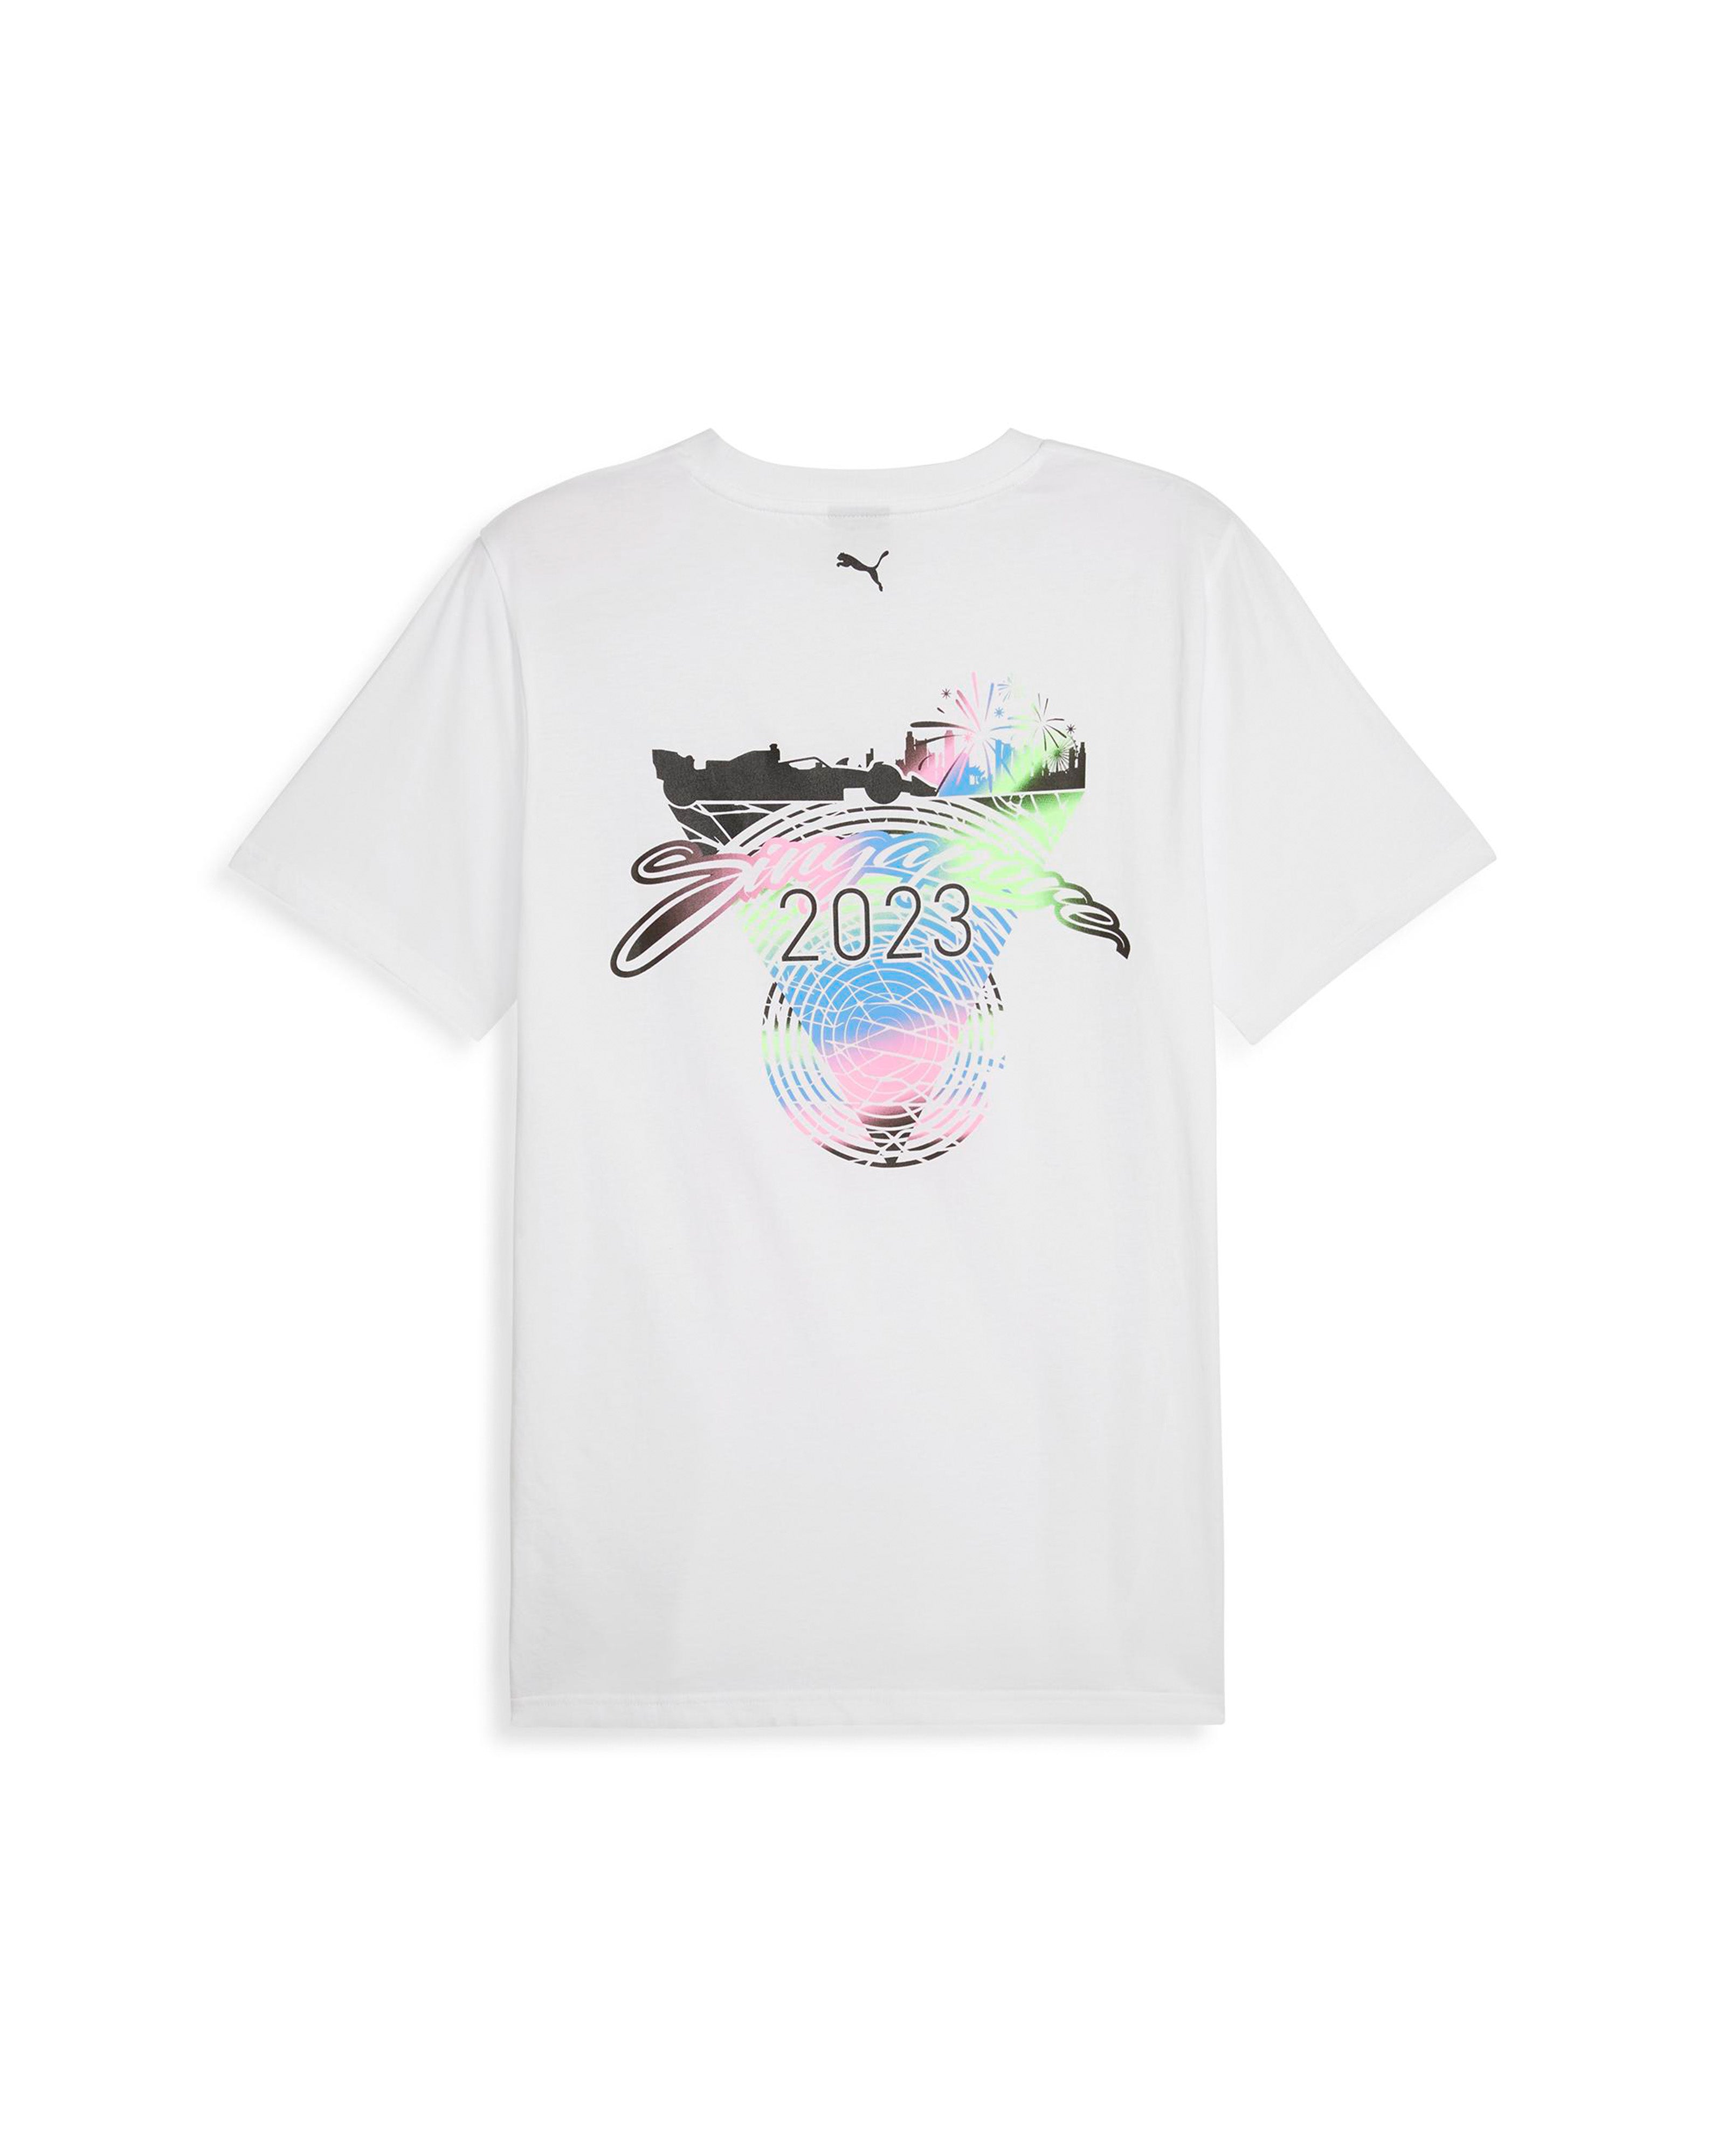 Mens 2023 Singapore Special Edition Tee White